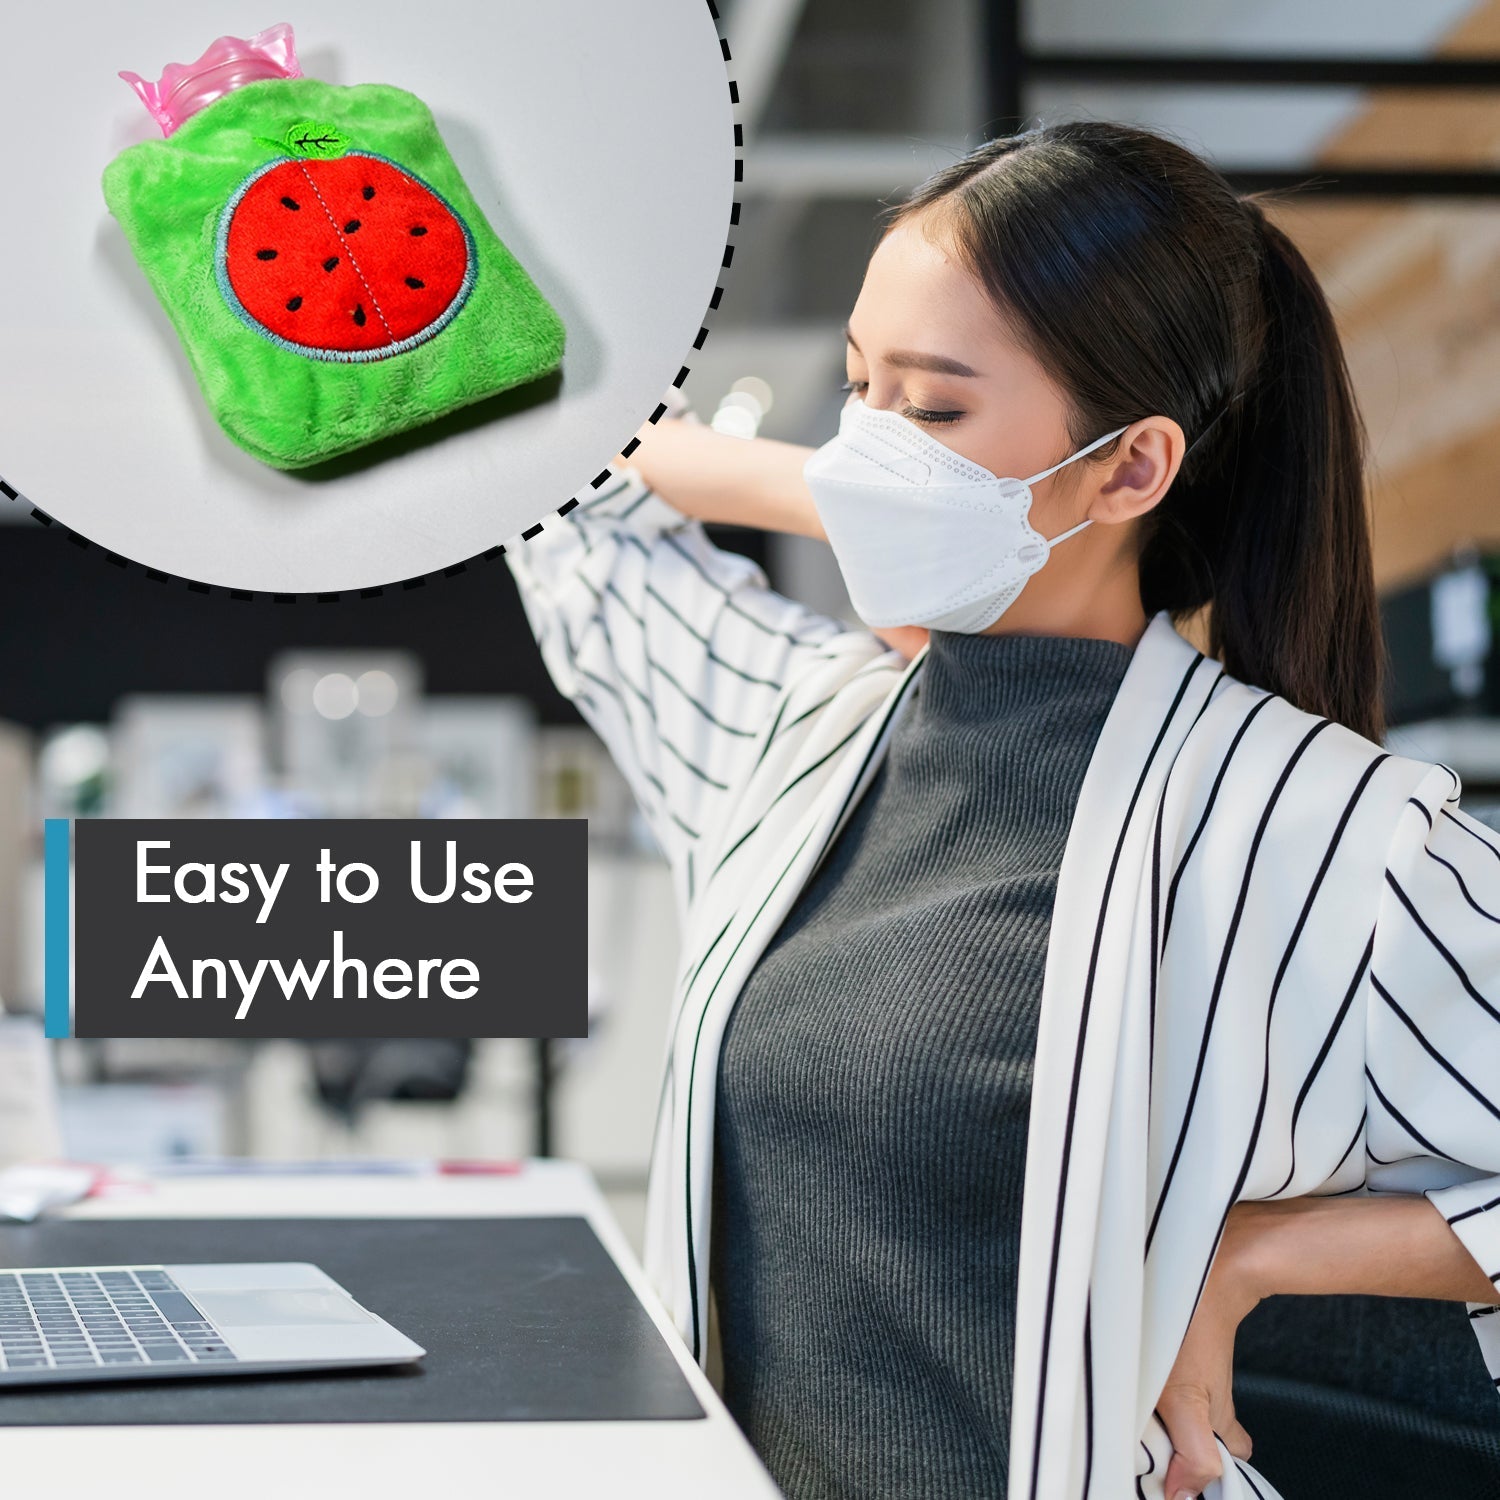 6509 Watermelon small Hot Water Bag with Cover for Pain Relief, Neck, Shoulder Pain and Hand, Feet Warmer, Menstrual Cramps. DeoDap